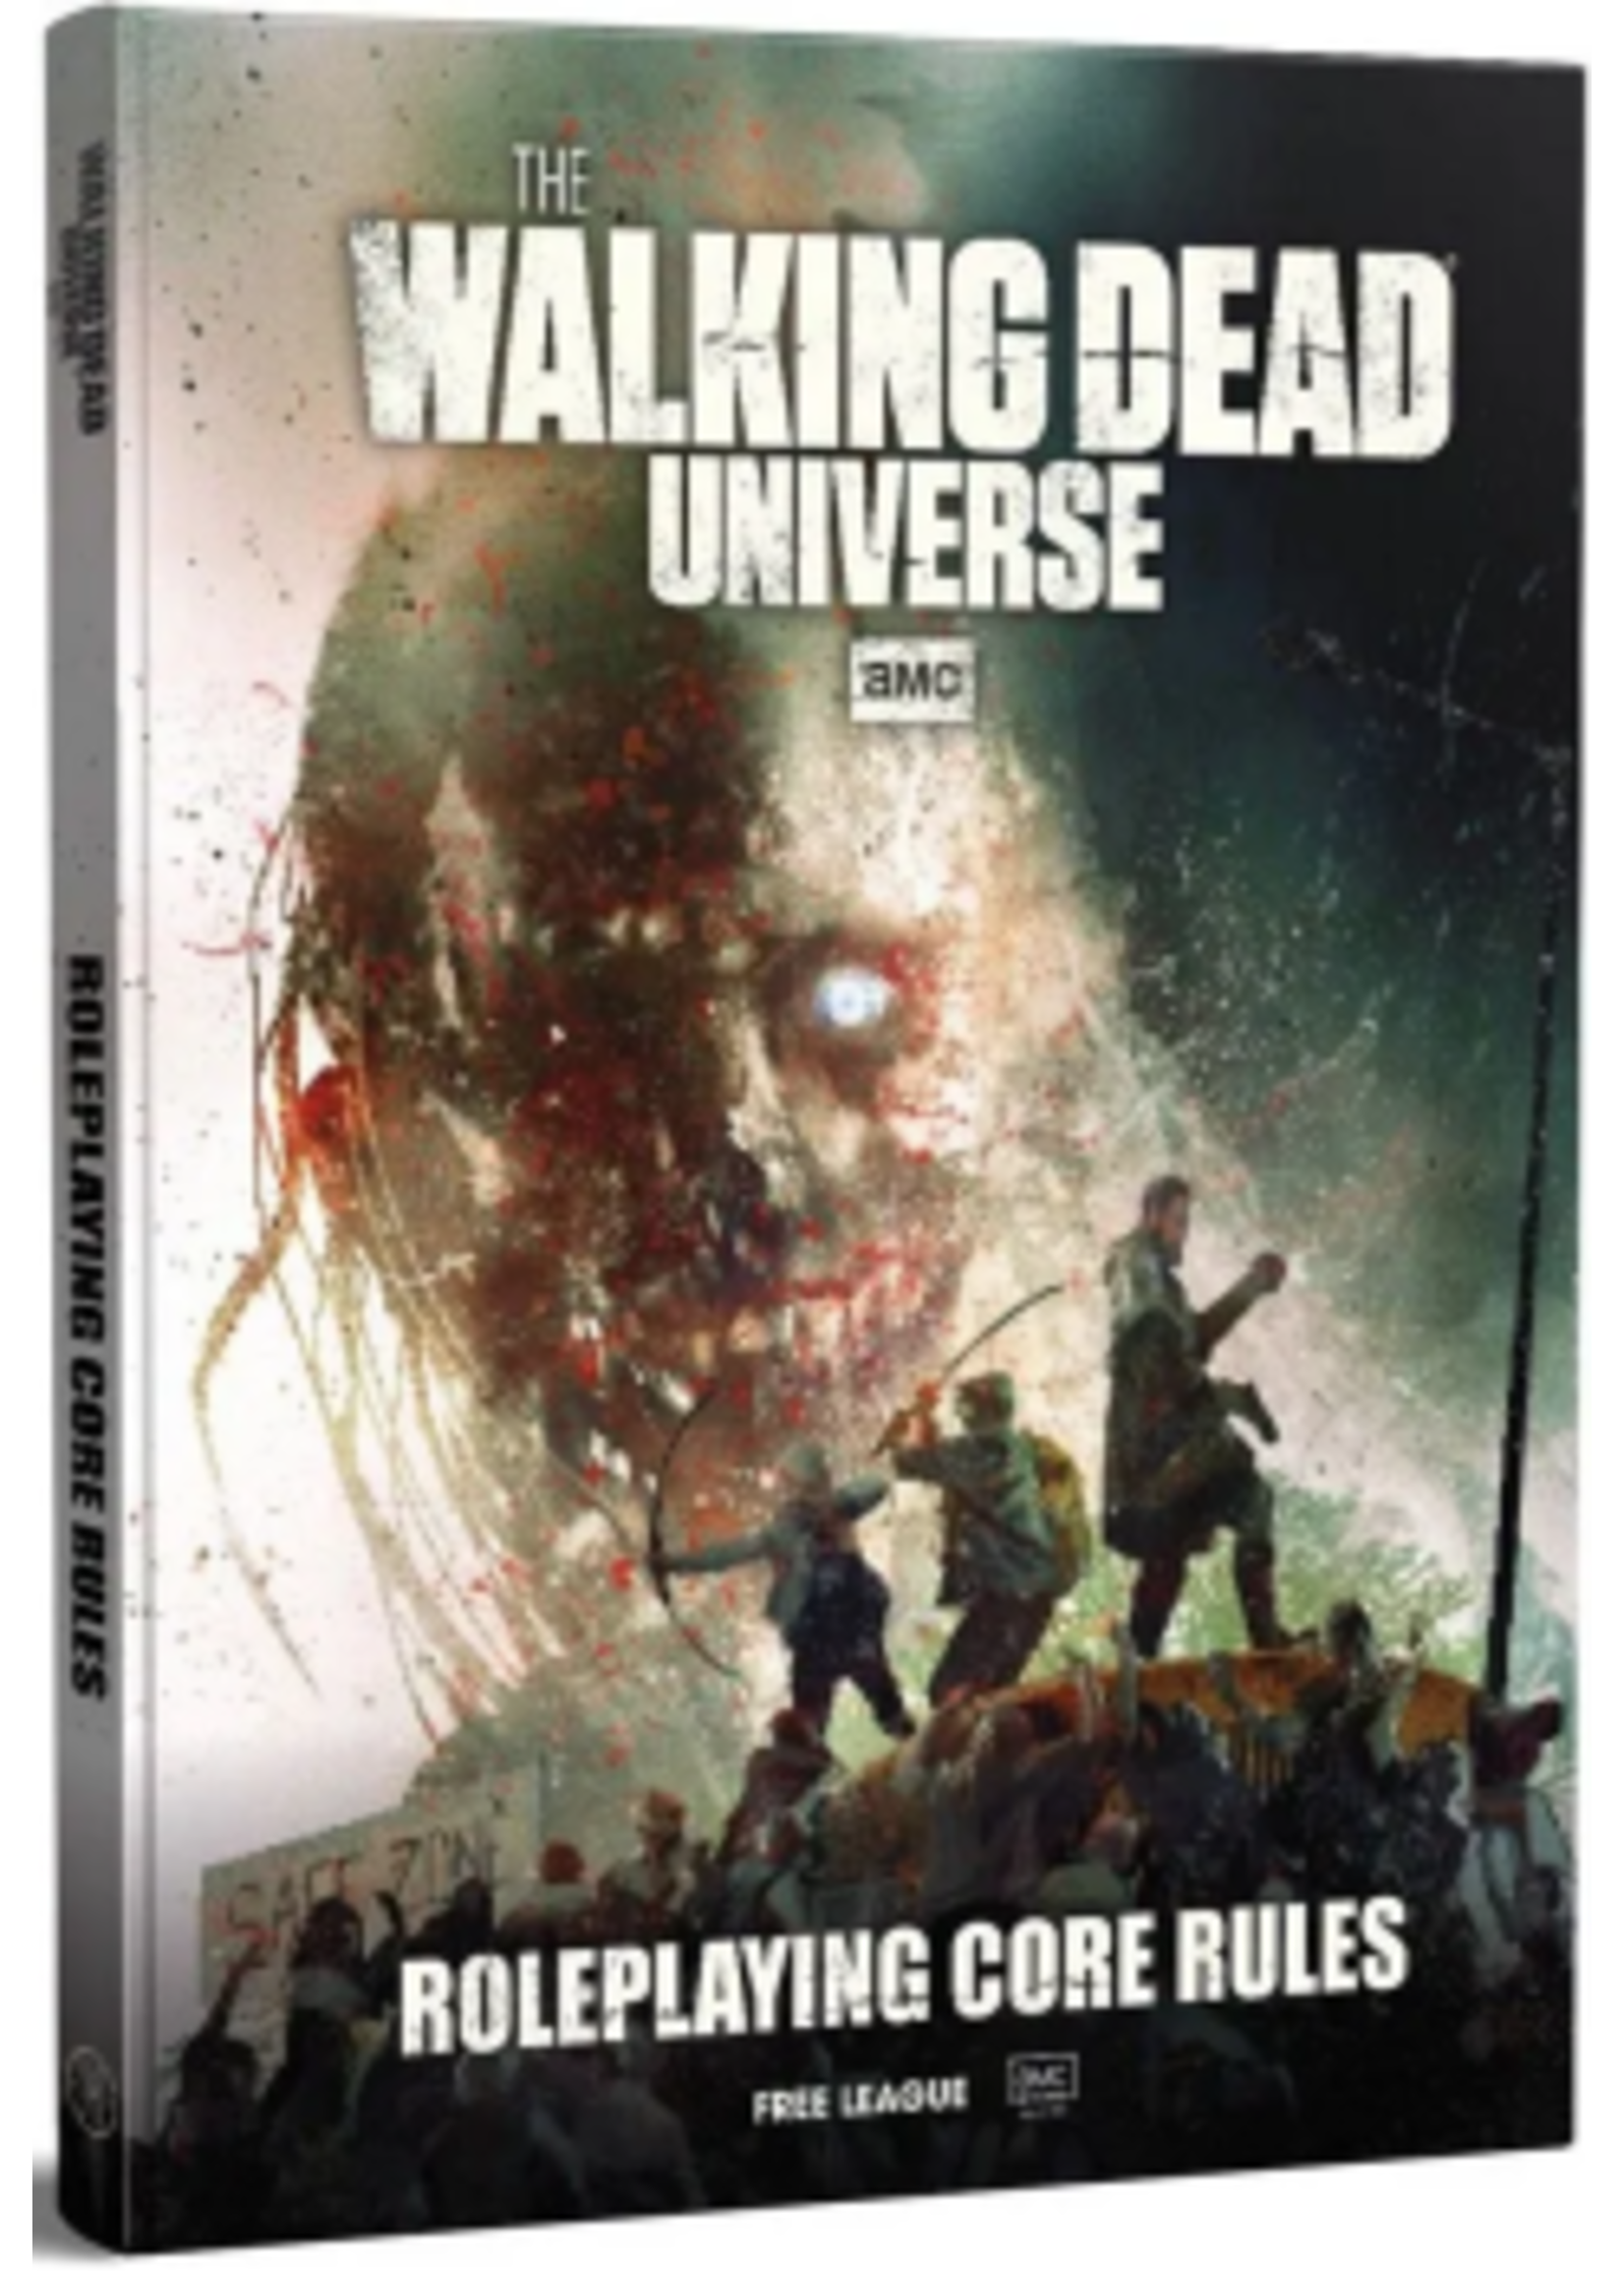 THE WALKING DEAD UNIVERSE RPG CORE RULES HC